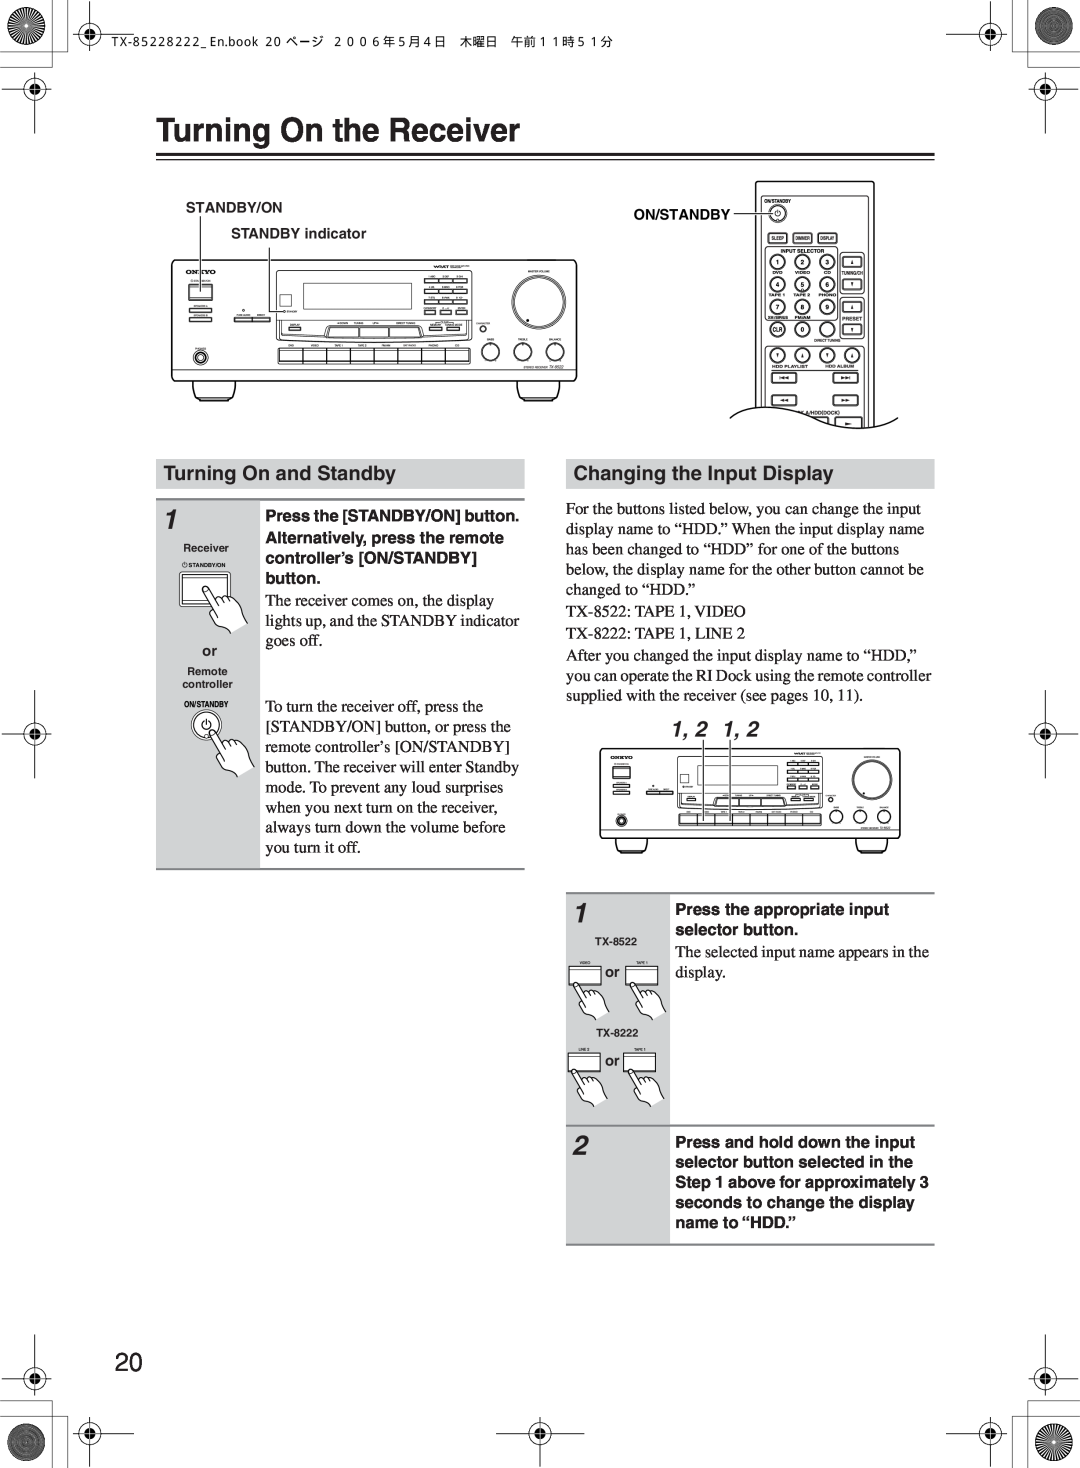 Onkyo TX-8222 Turning On the Receiver, Turning On and Standby, Changing the Input Display, Press the appropriate input 